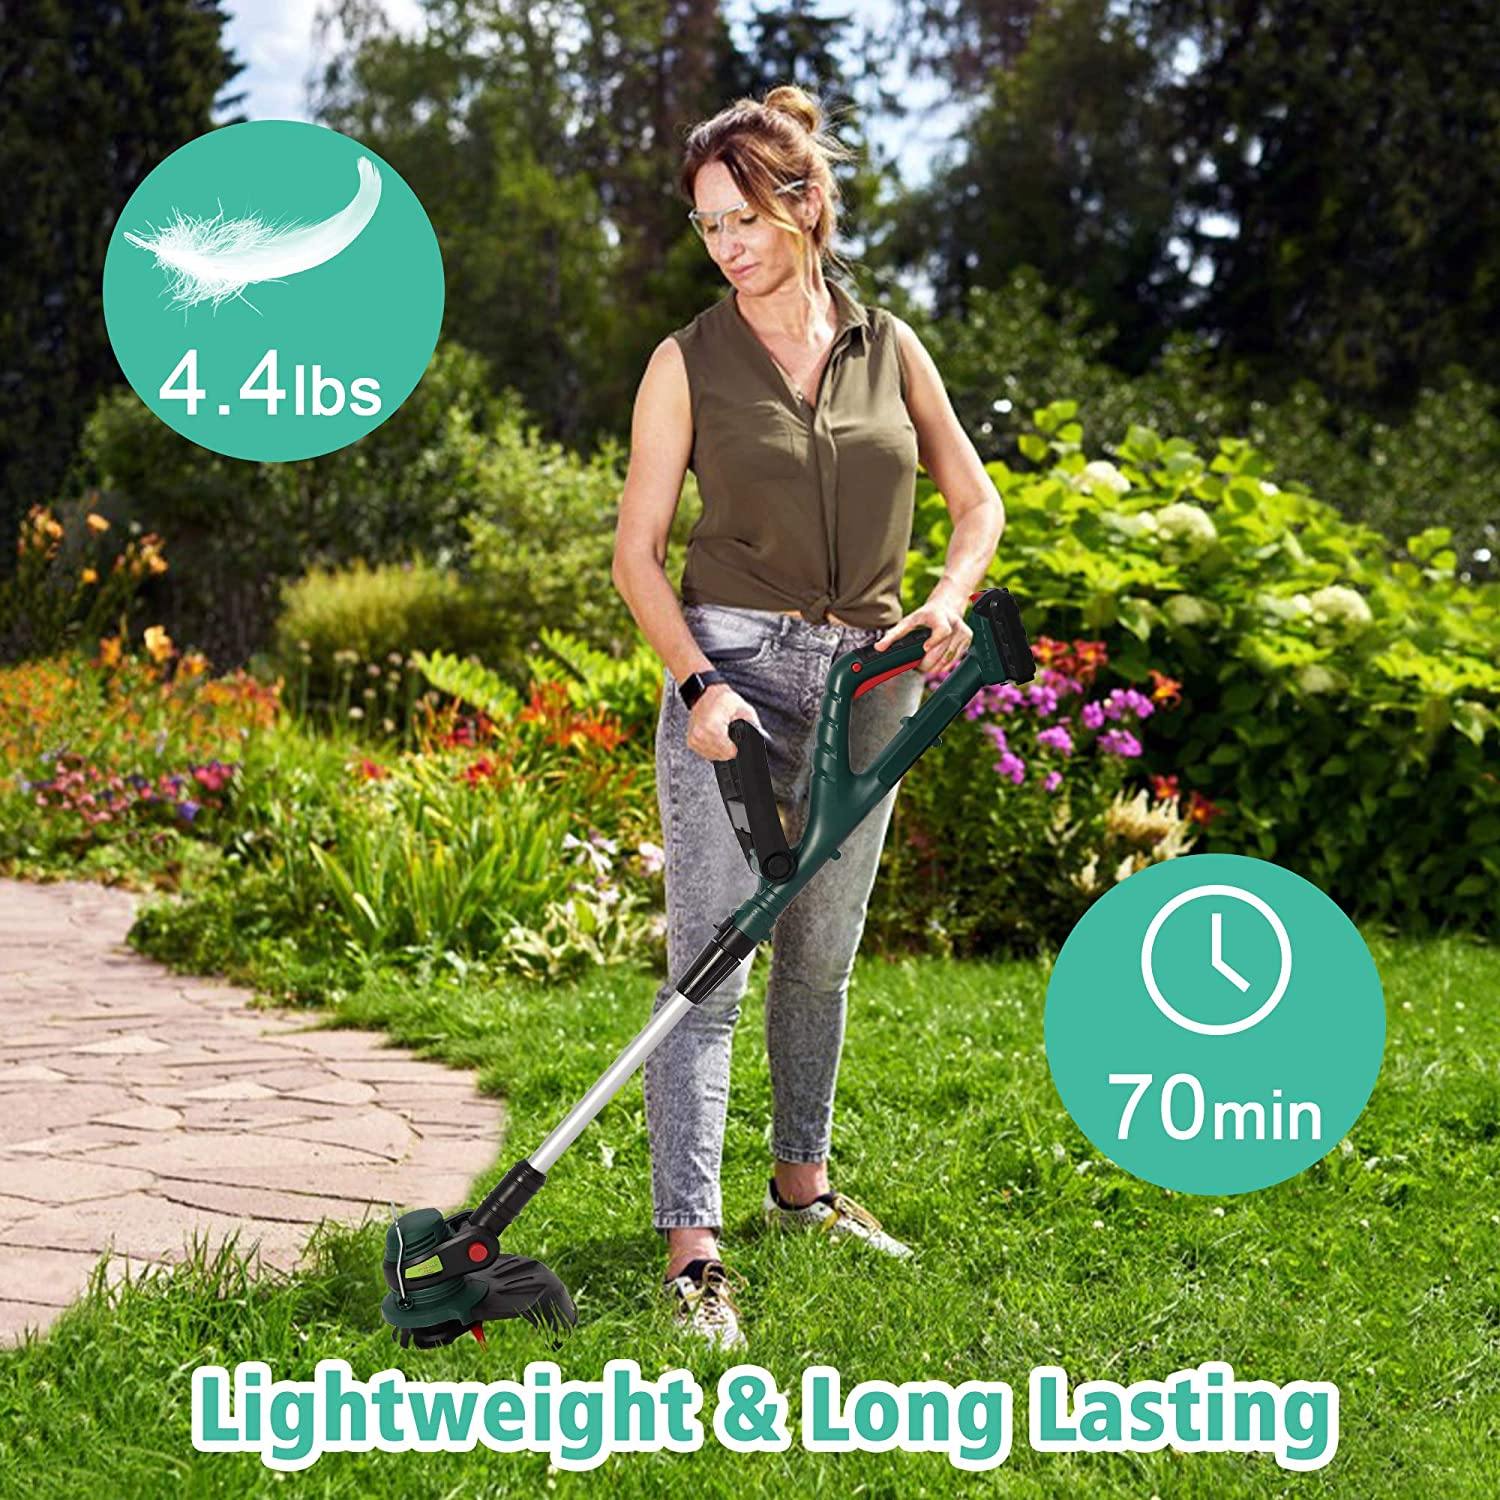 20V Cordless String Trimmer/Edger, Adjustable Head & Handle, 10” Cutting Path, 2.0Ah Battery & Charger Included - Bosonshop